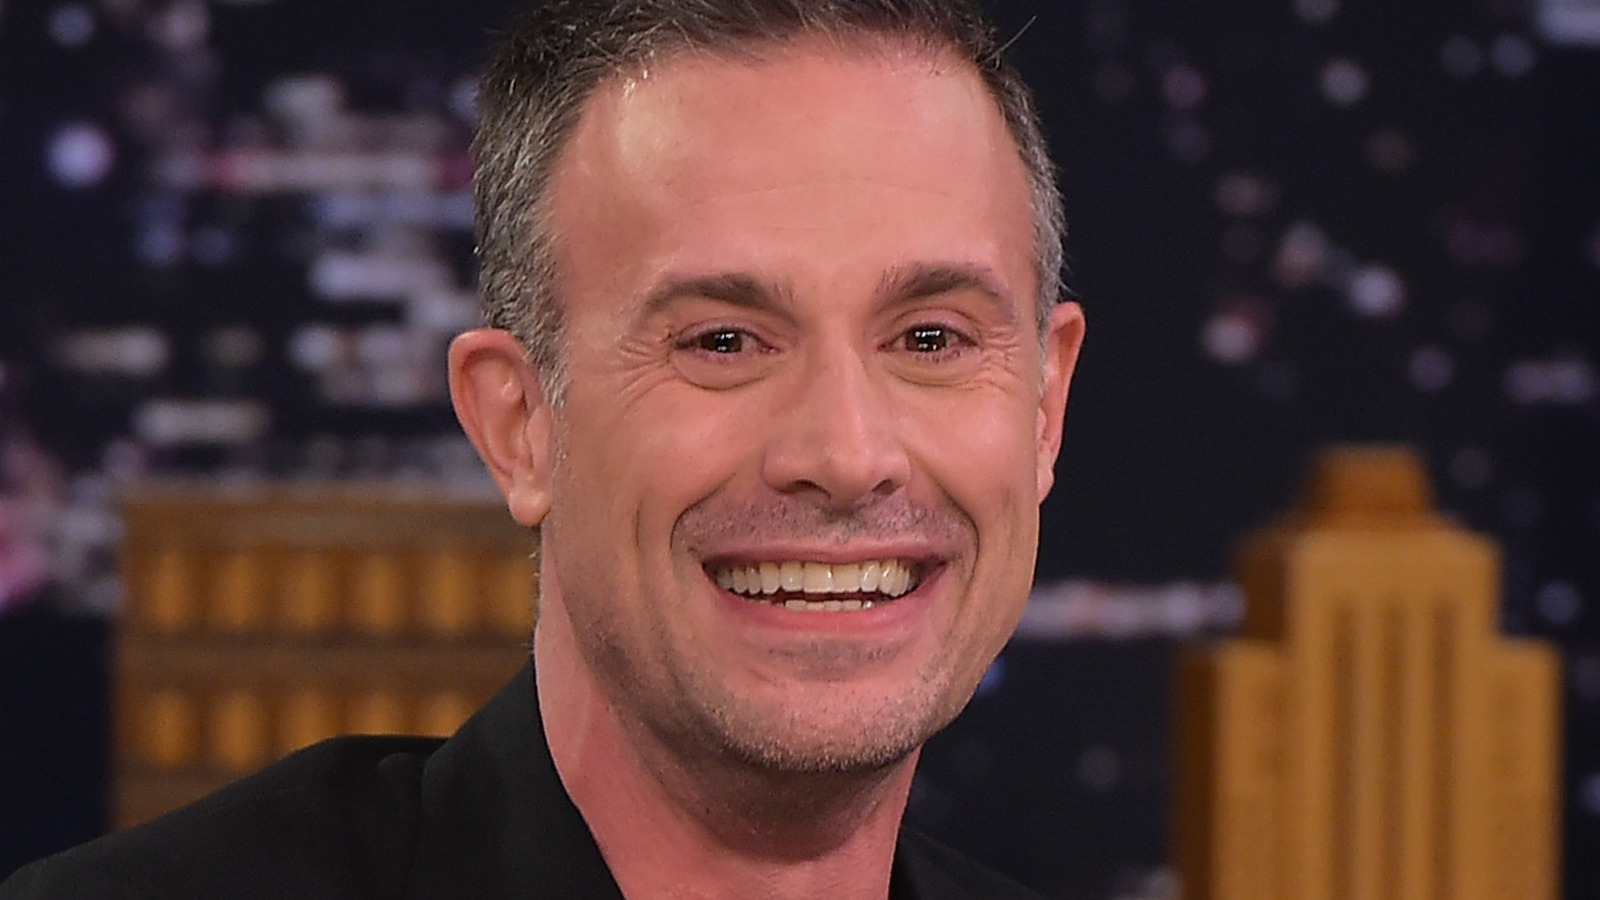 Freddie Prinze Jr. Says MJF Should Not Leave AEW And Go To The WWE